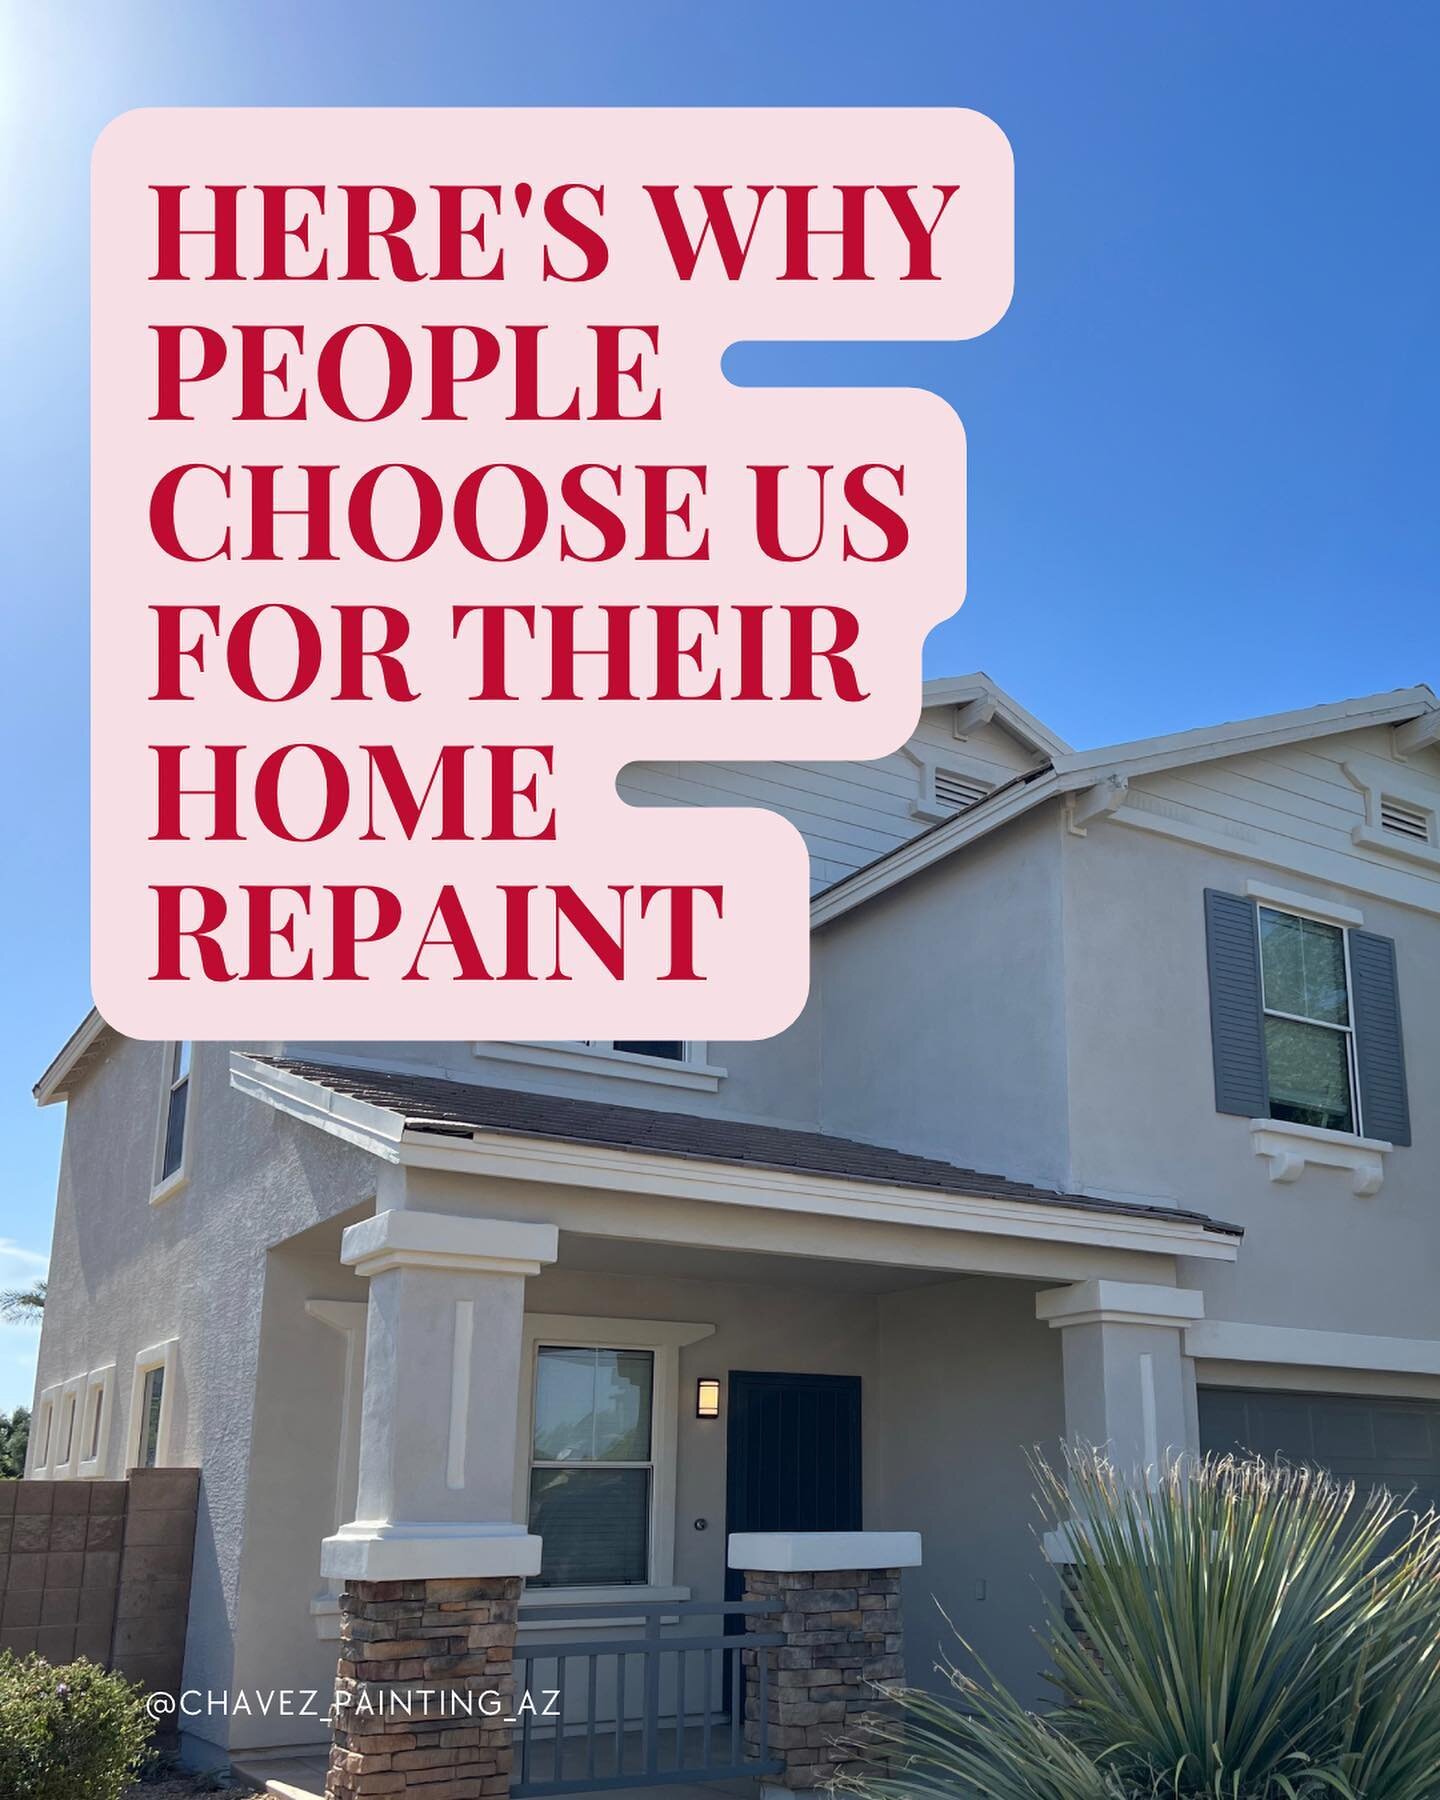 Click our link in bio for your free estimate

📱 Call us for your FREE estimate! 
✅ Residential Interior and exterior 
✅ Commercial Interior and exterior 
✅ Cabinet Restoration 
🚨PAINT NOW, PAY LATER!! 

#paintlife #painters #avondale #goodyear #gle